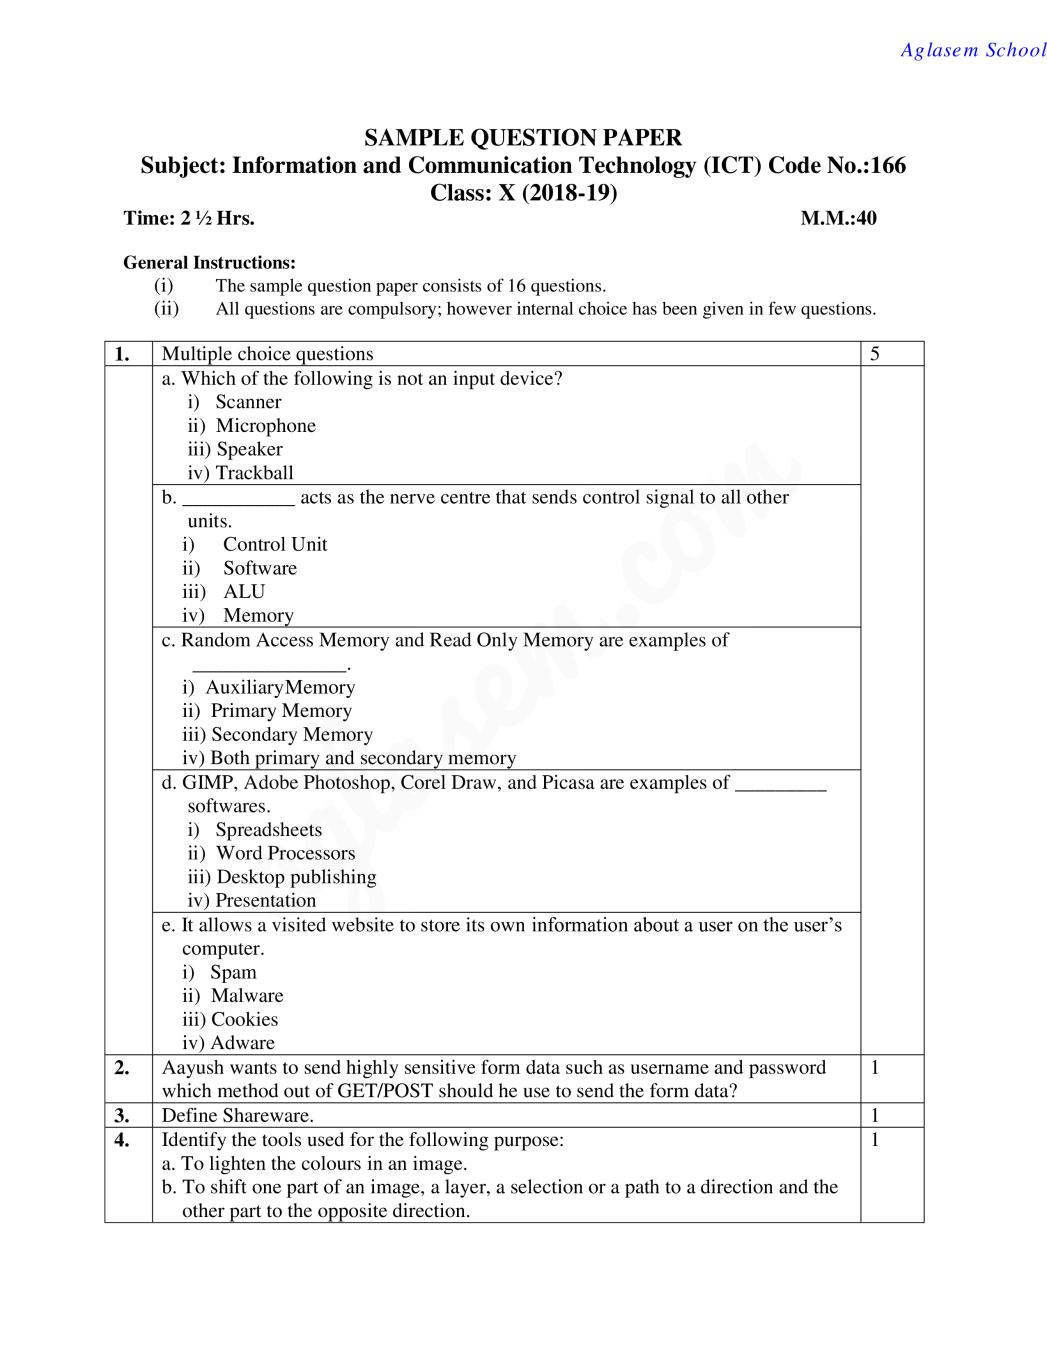 CBSE Class 10 Sample Paper 2019 for Information and Communication Technology - Page 1